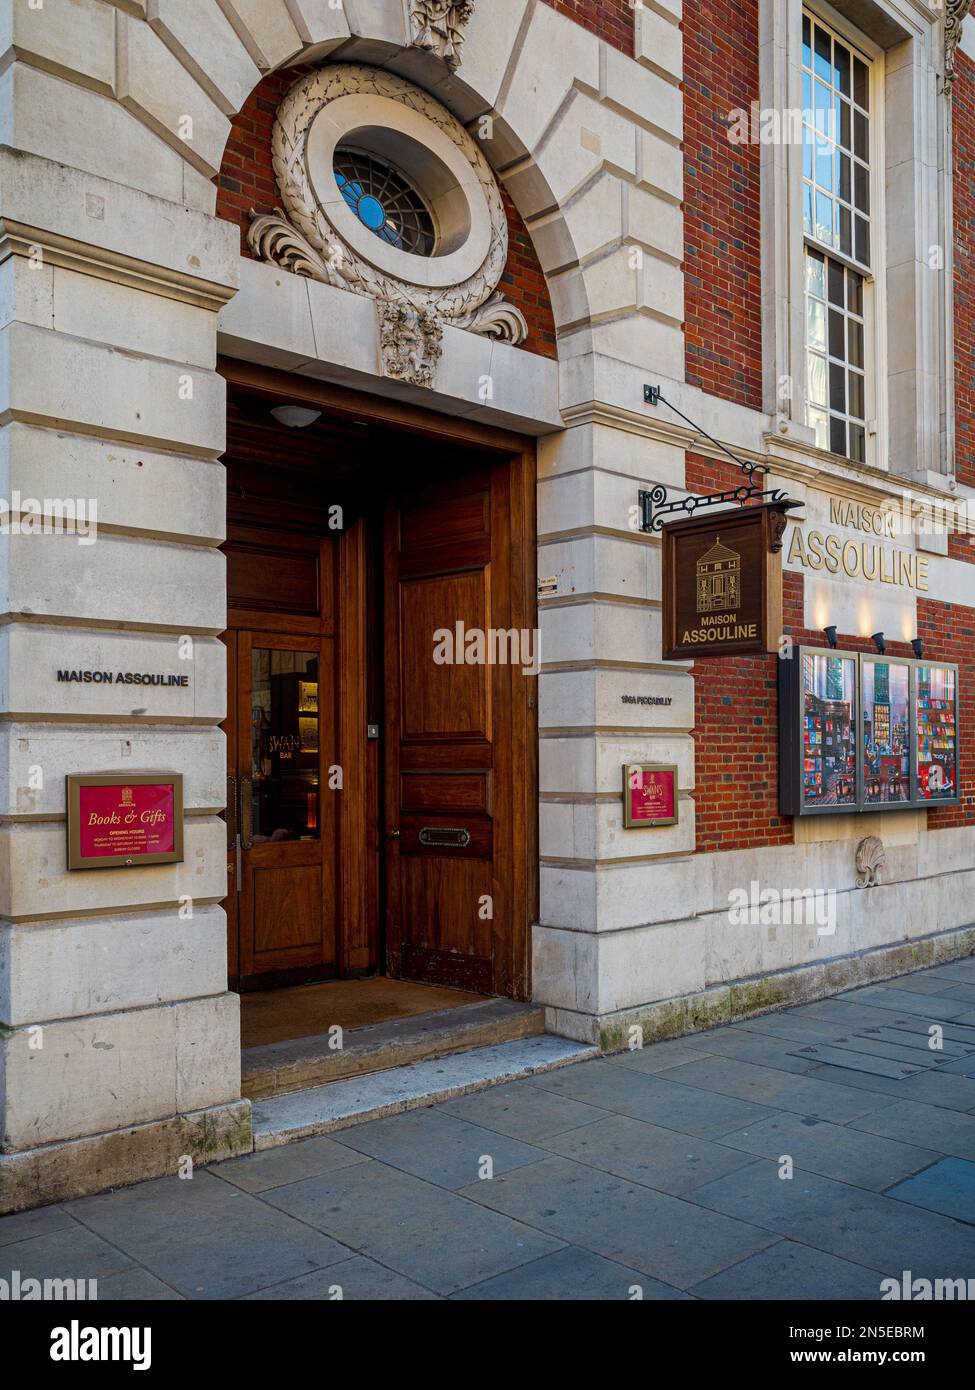 Maison Assouline London international flagship store at 196A Piccadilly, London. Described as a concept store for culture, the store opened in 2014. Stock Photo